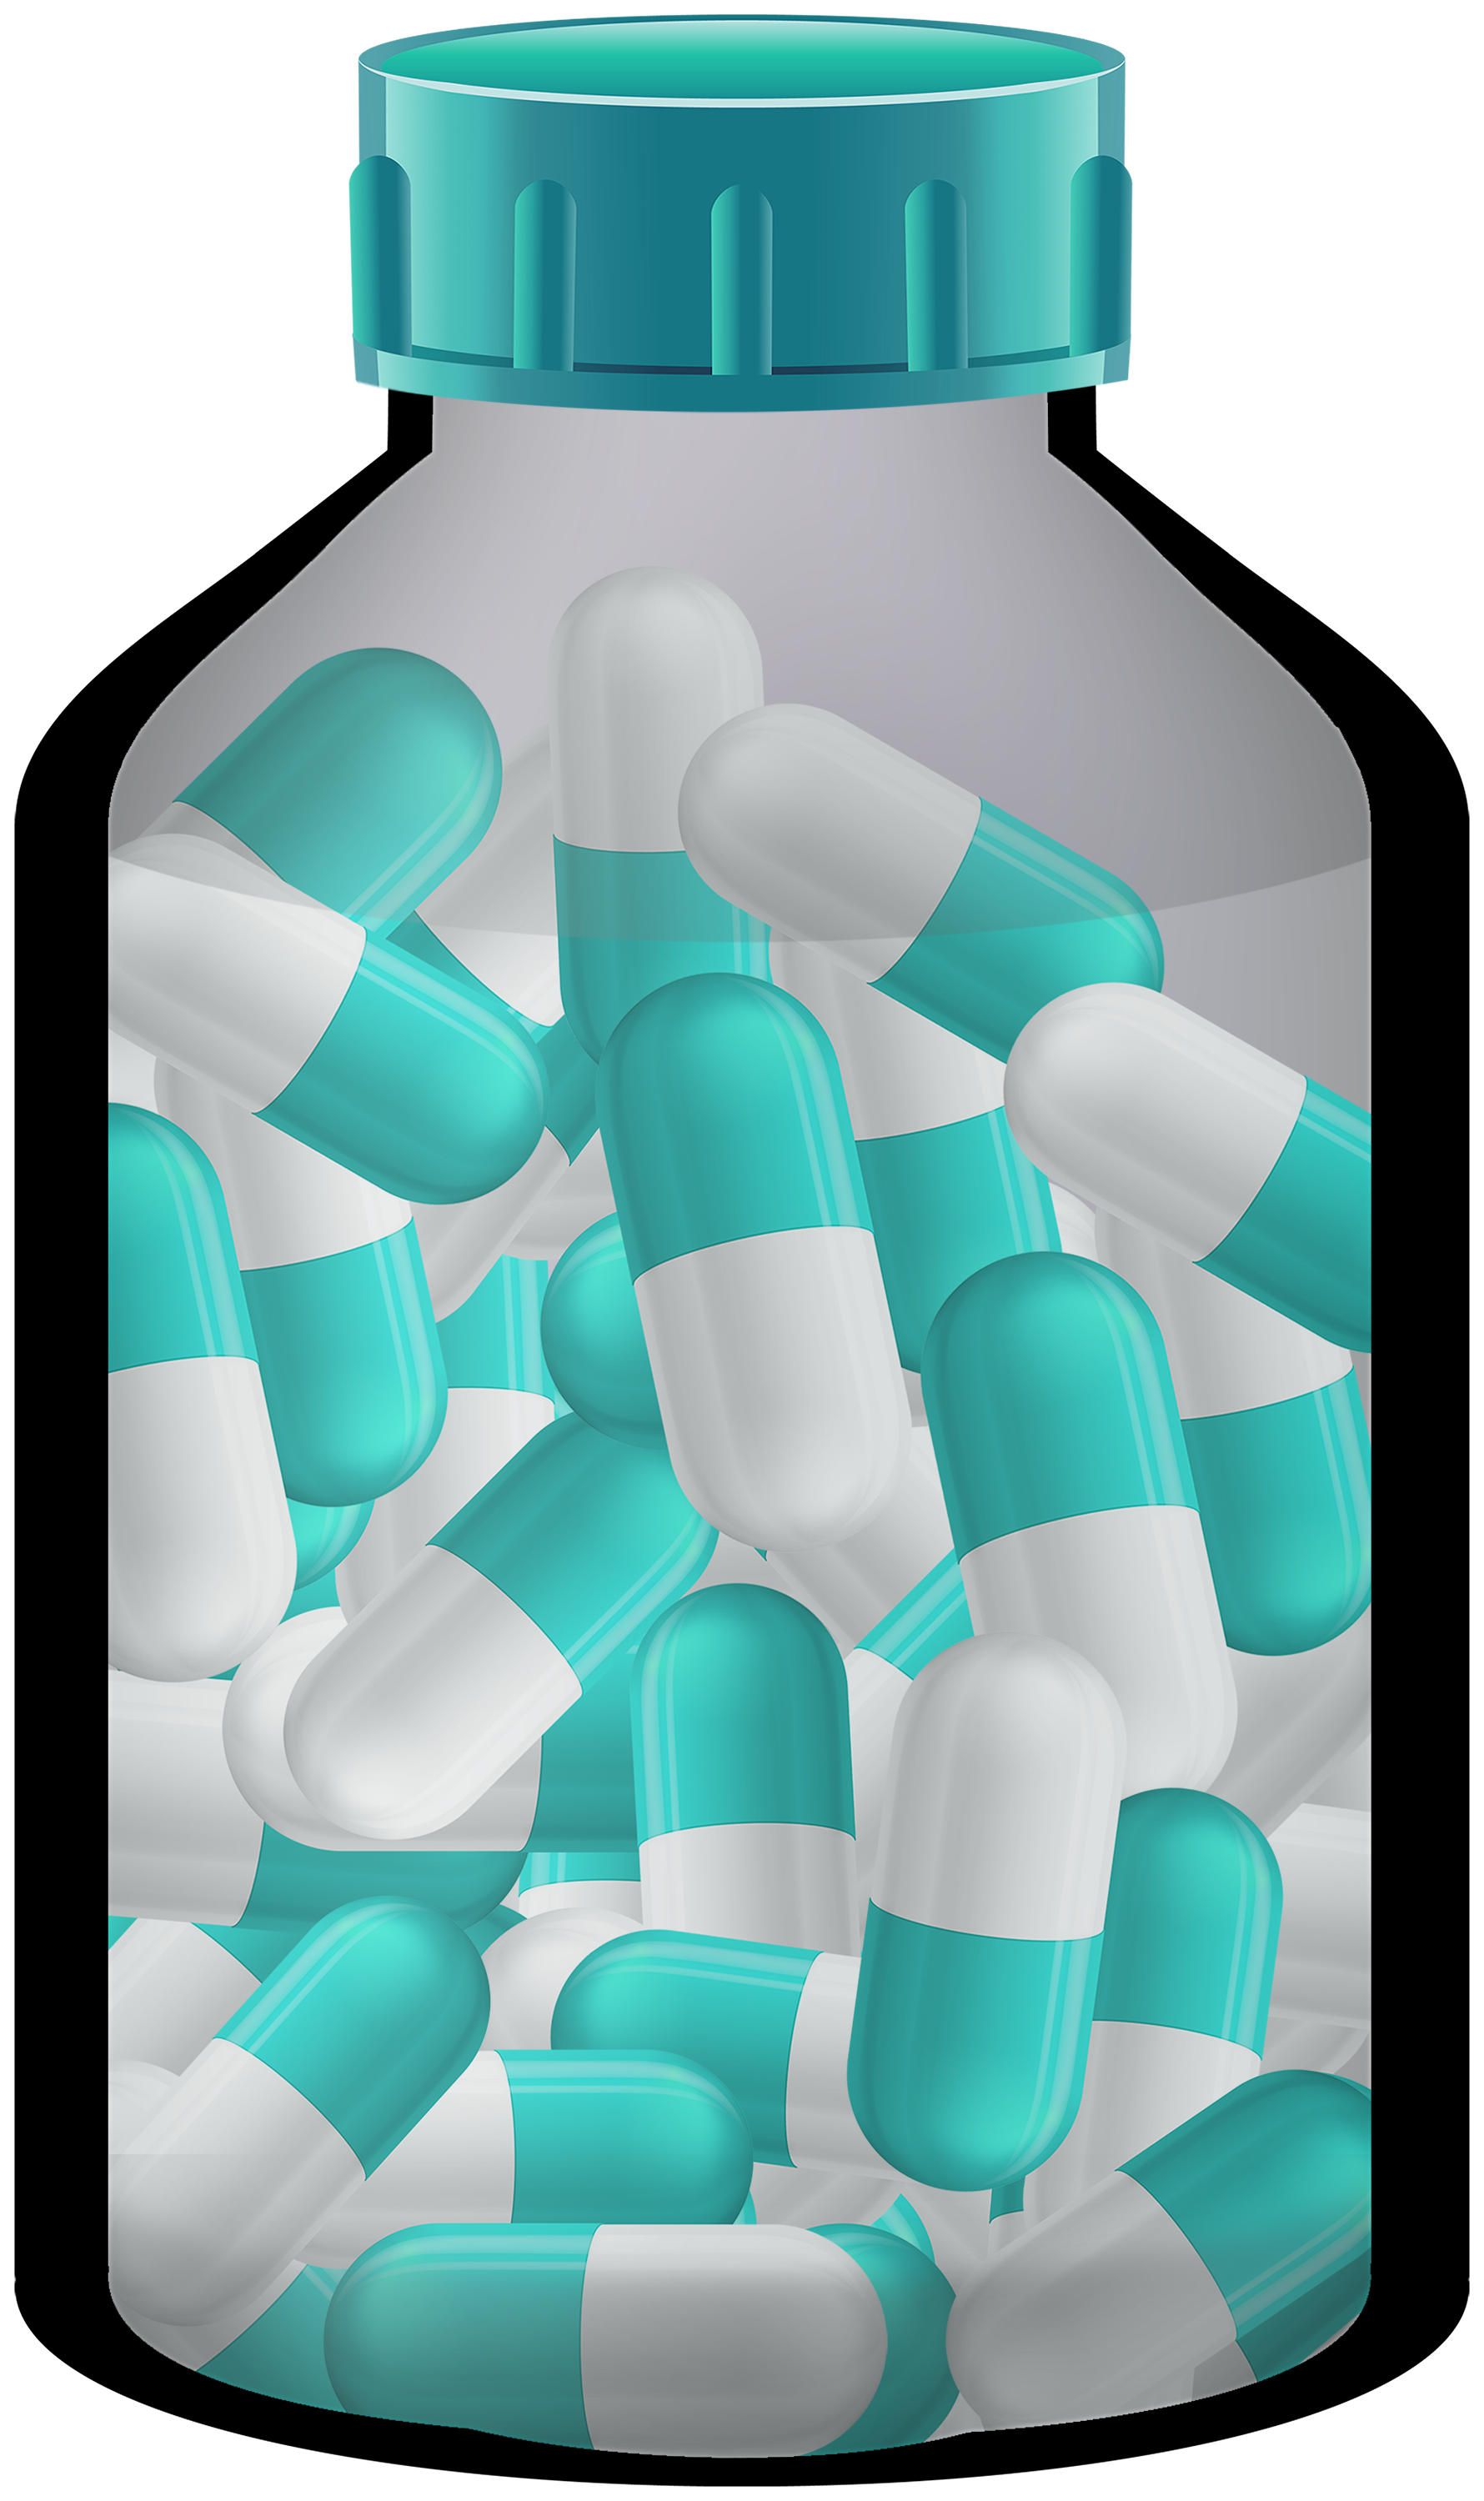 Blue Medicine Bottle With Pills Capsules PNG Clipart.